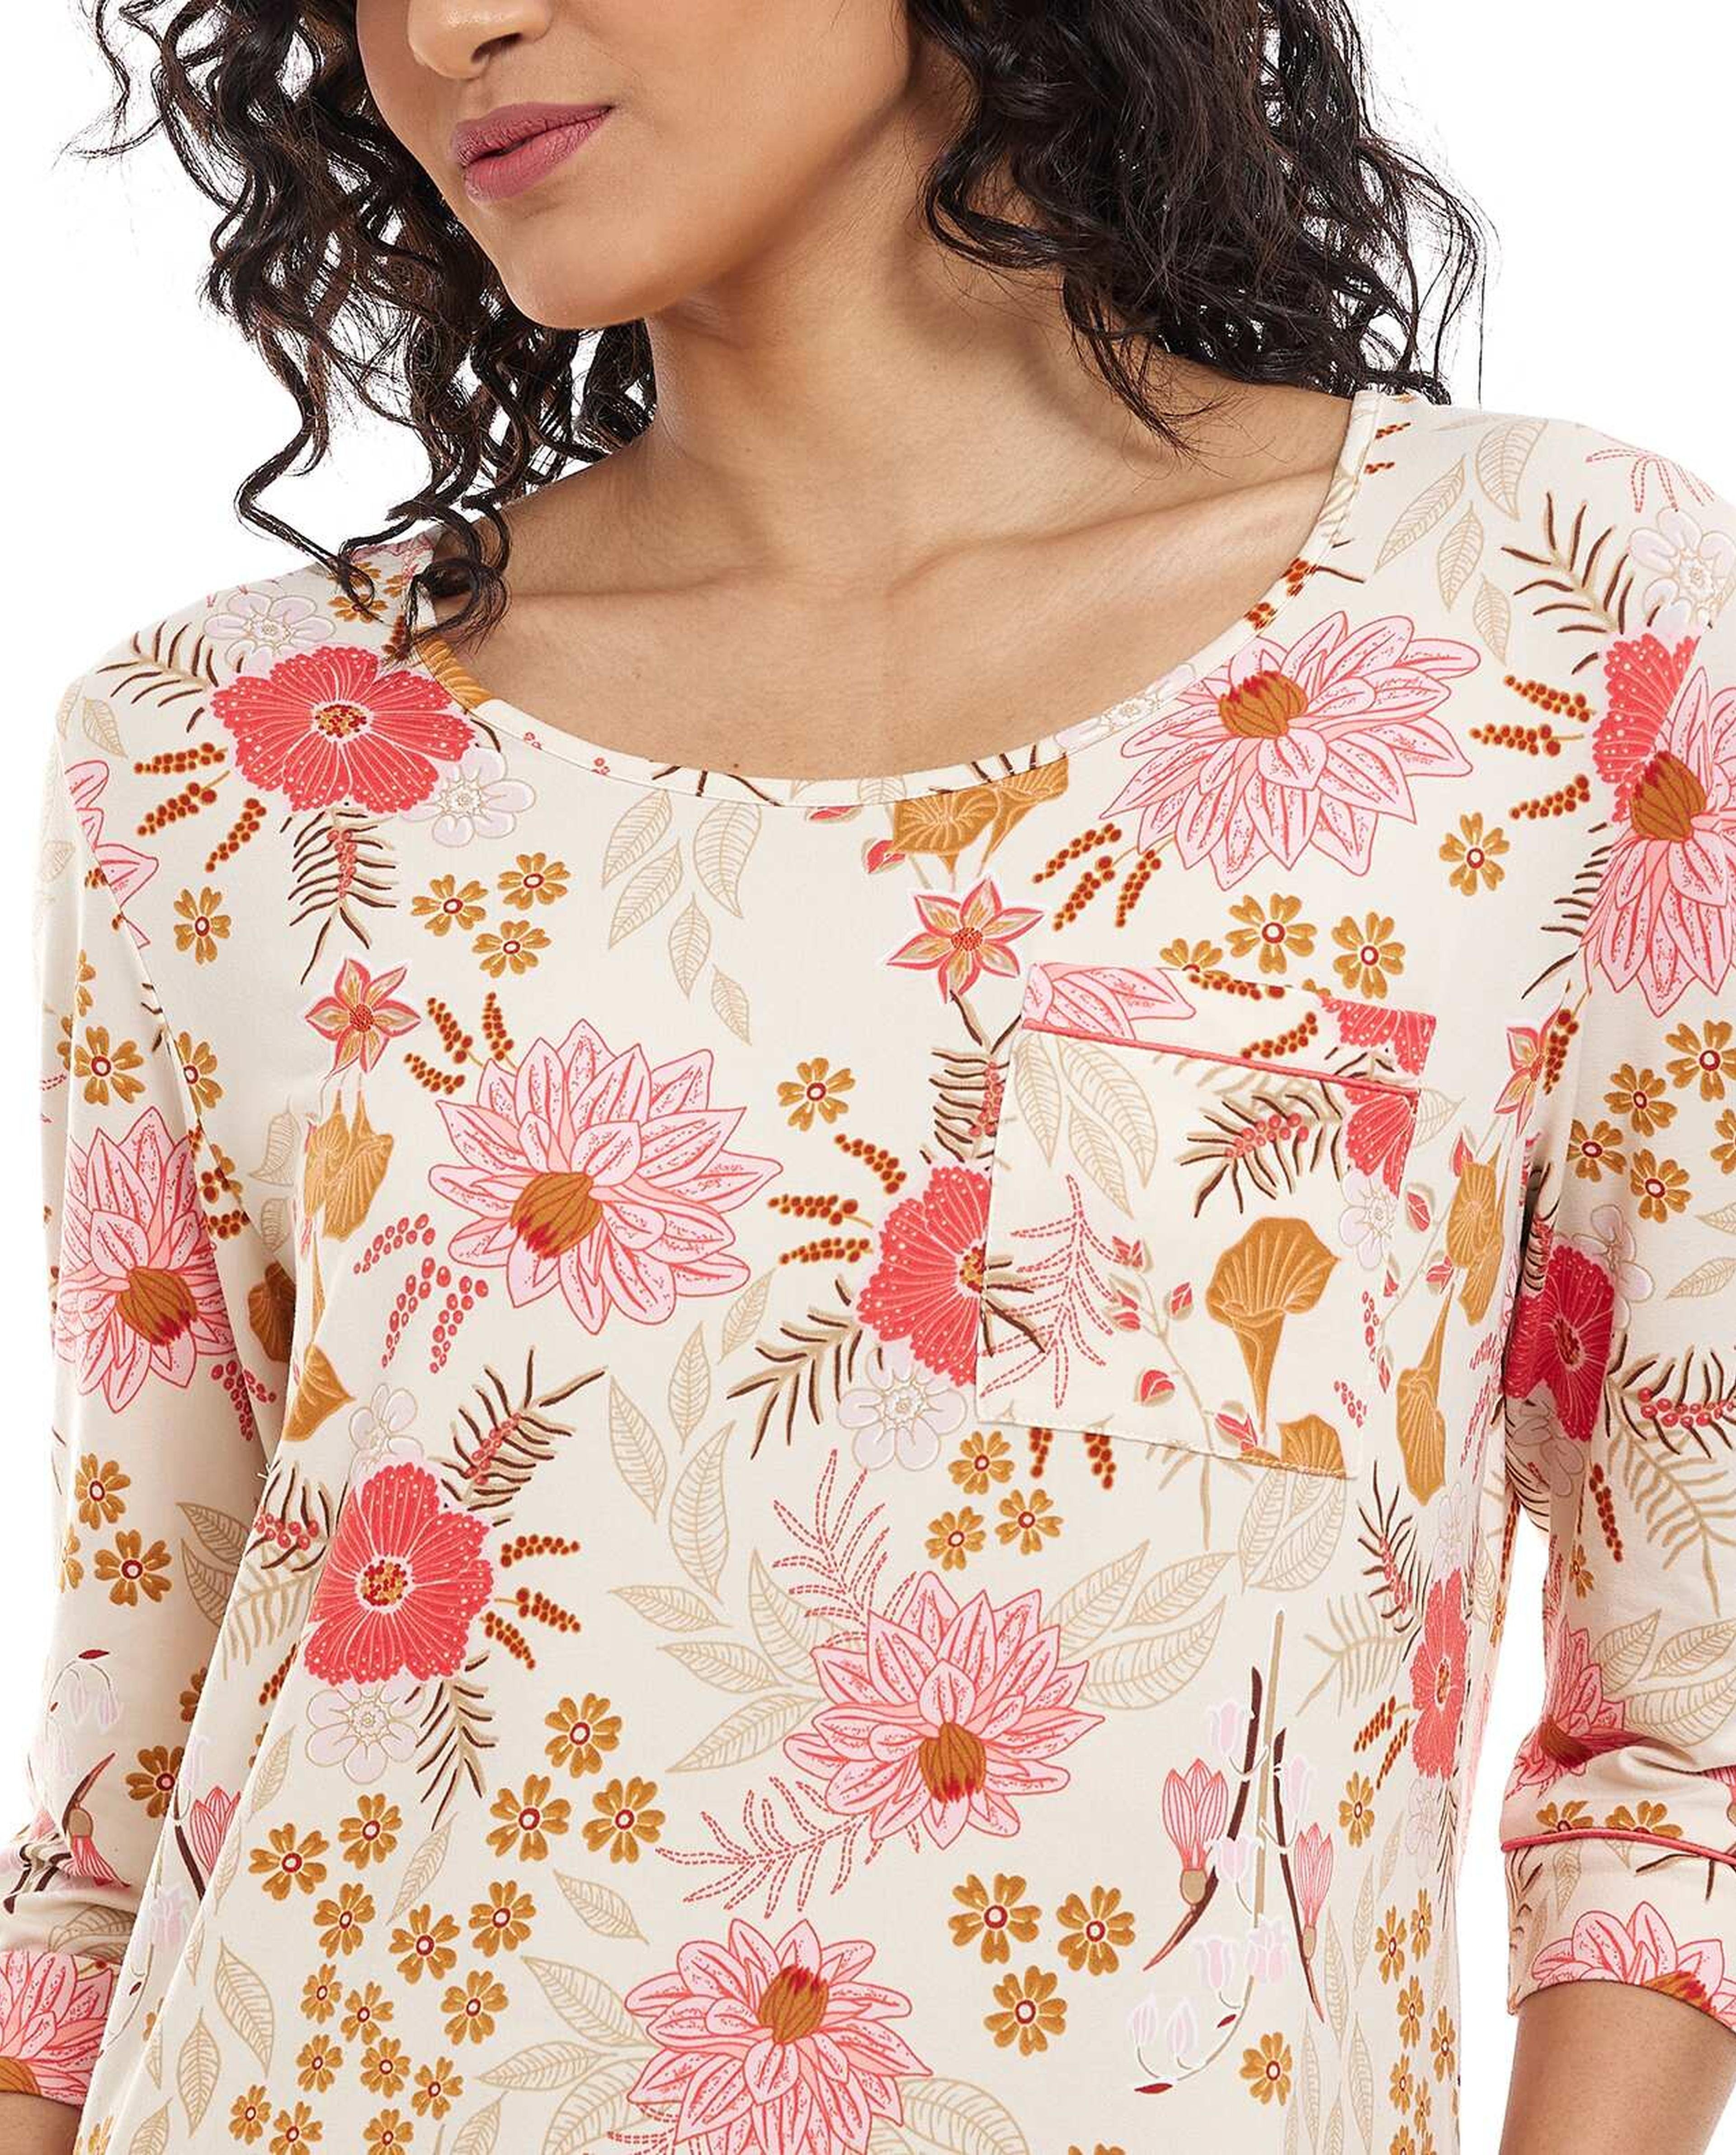 Floral Print Nightdress with 3/4 Sleeves